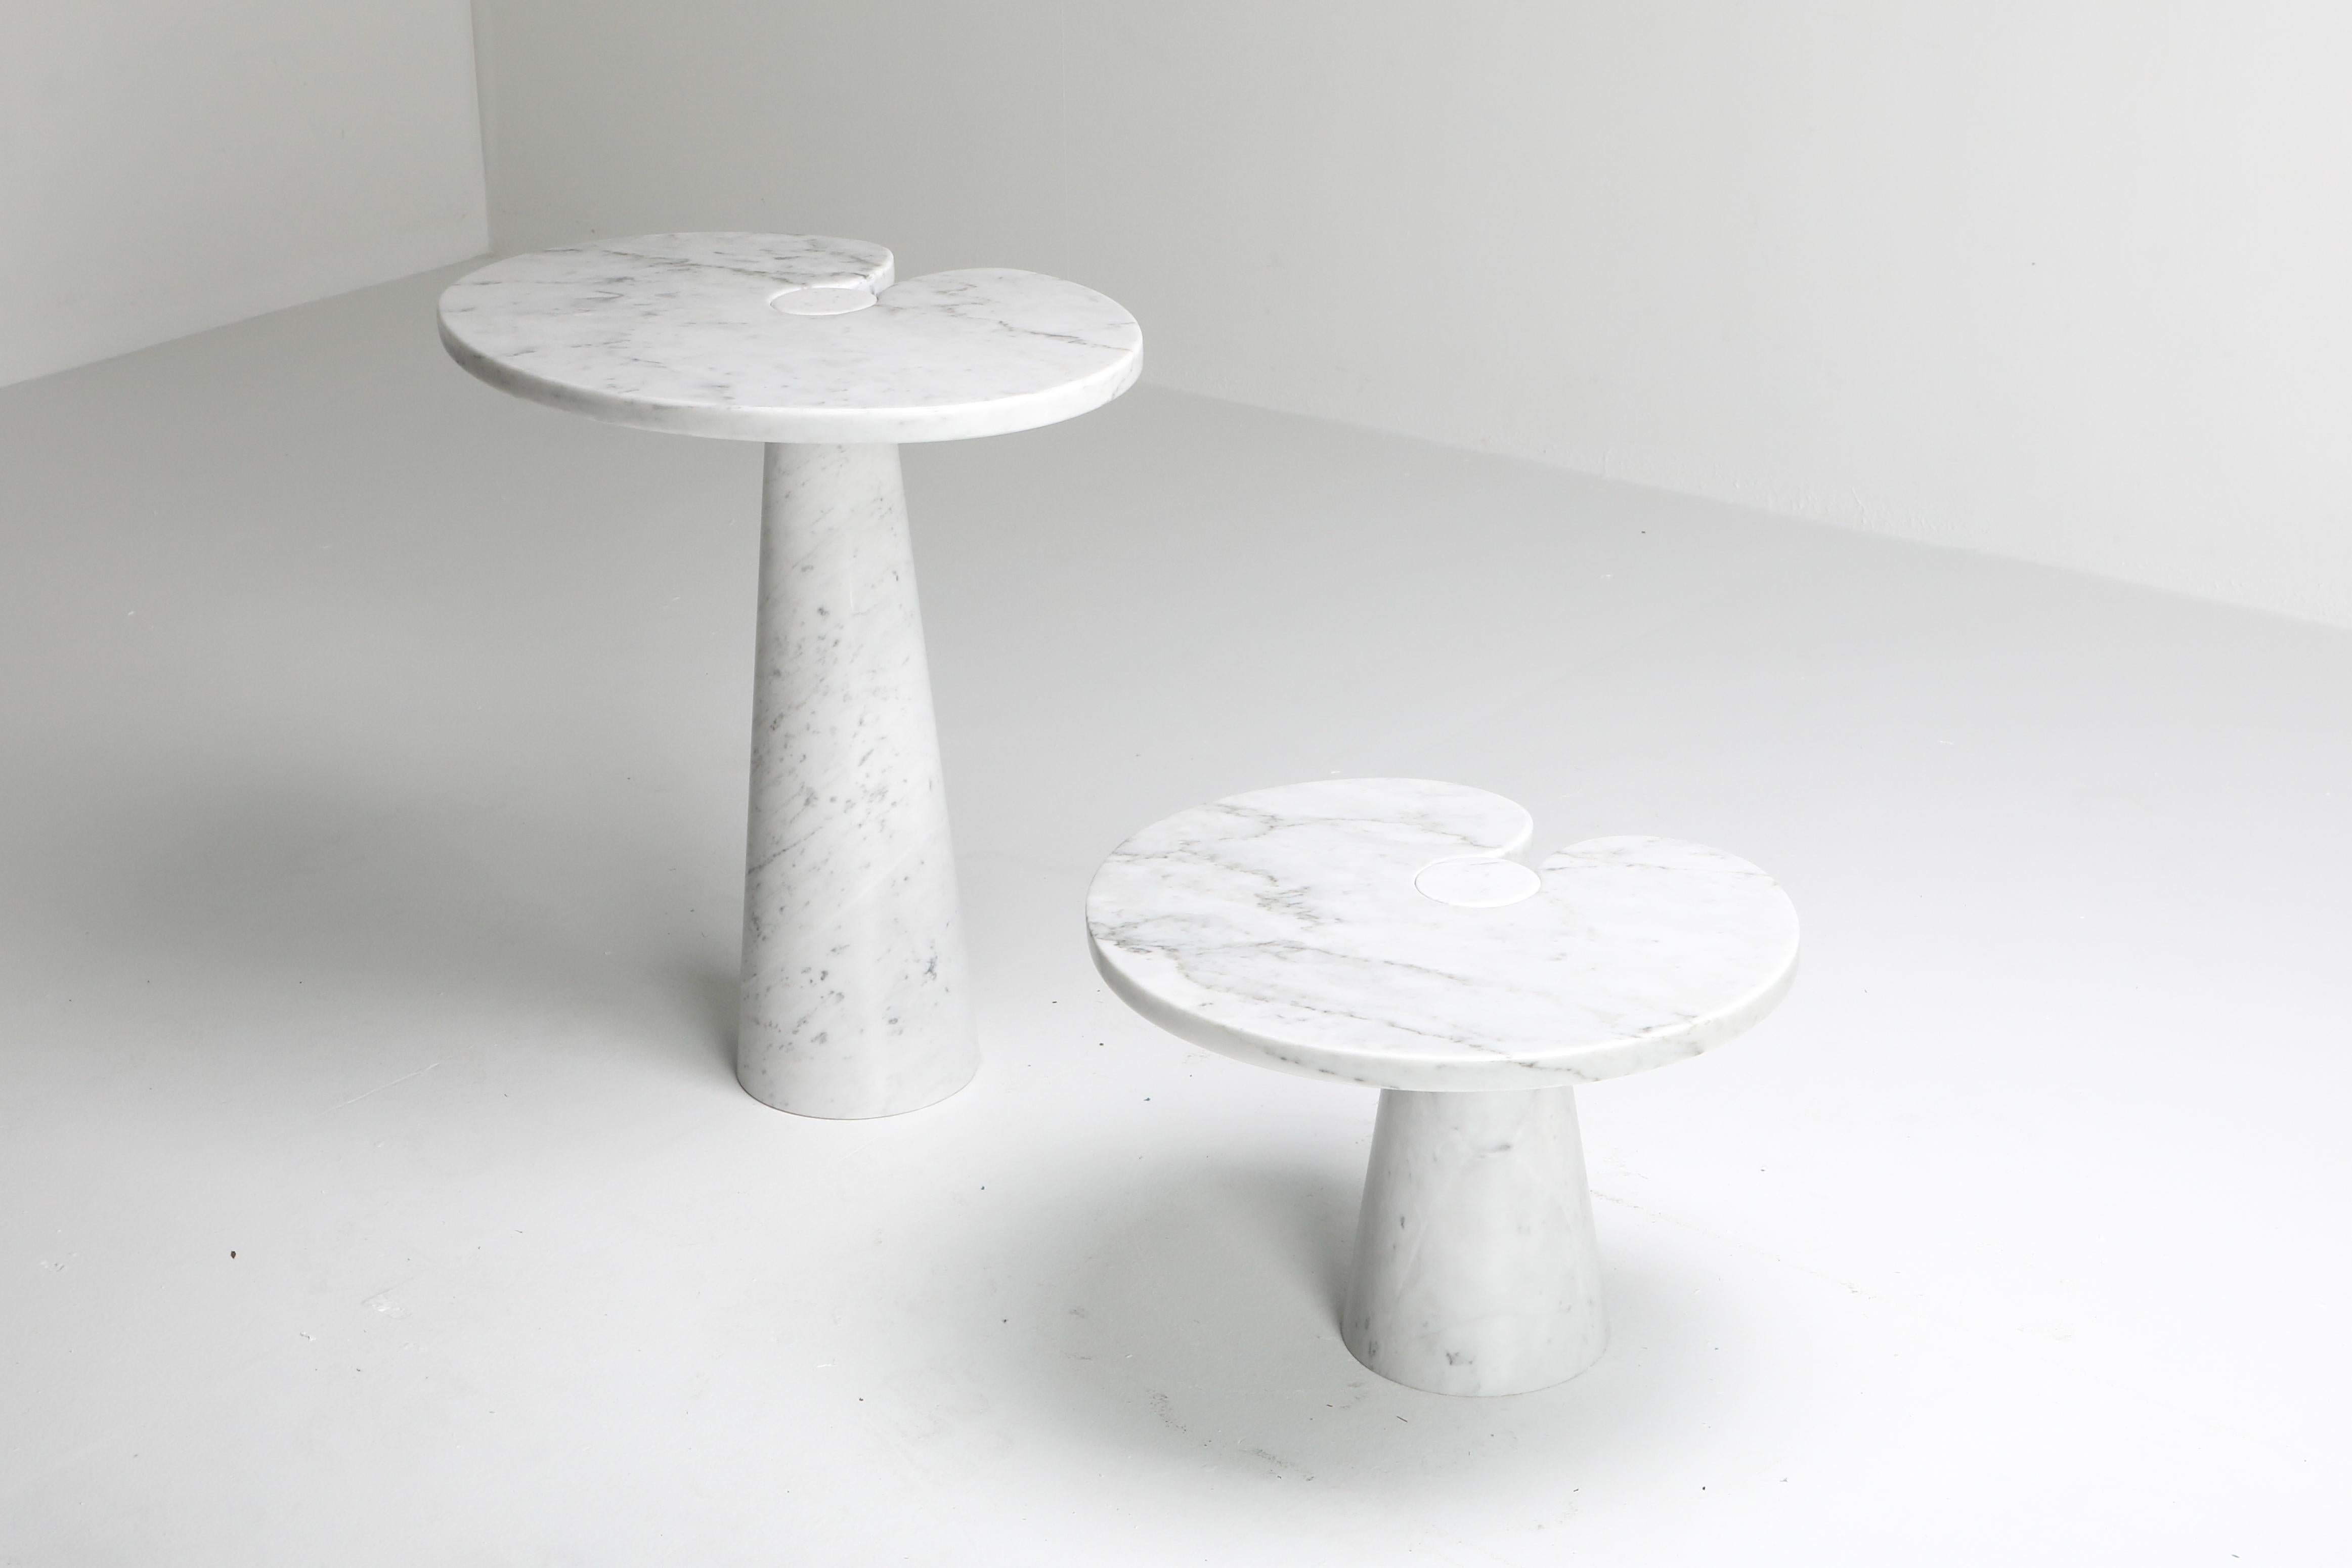 20th Century Eros White Carrara Marble Side Table by Angelo Mangiarotti for Skipper, Italy